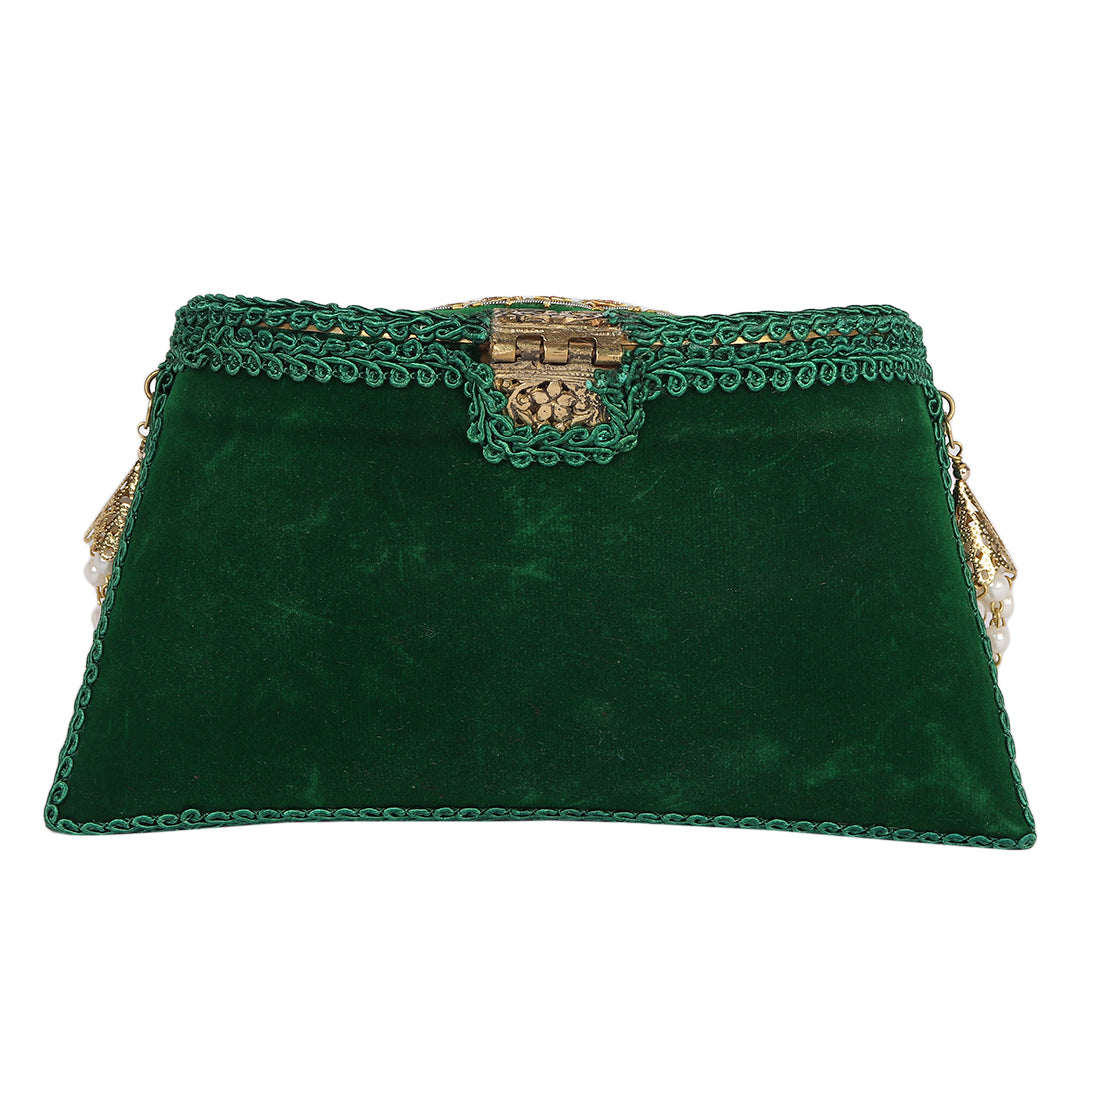 Peacock Embroidery Purse Green Color